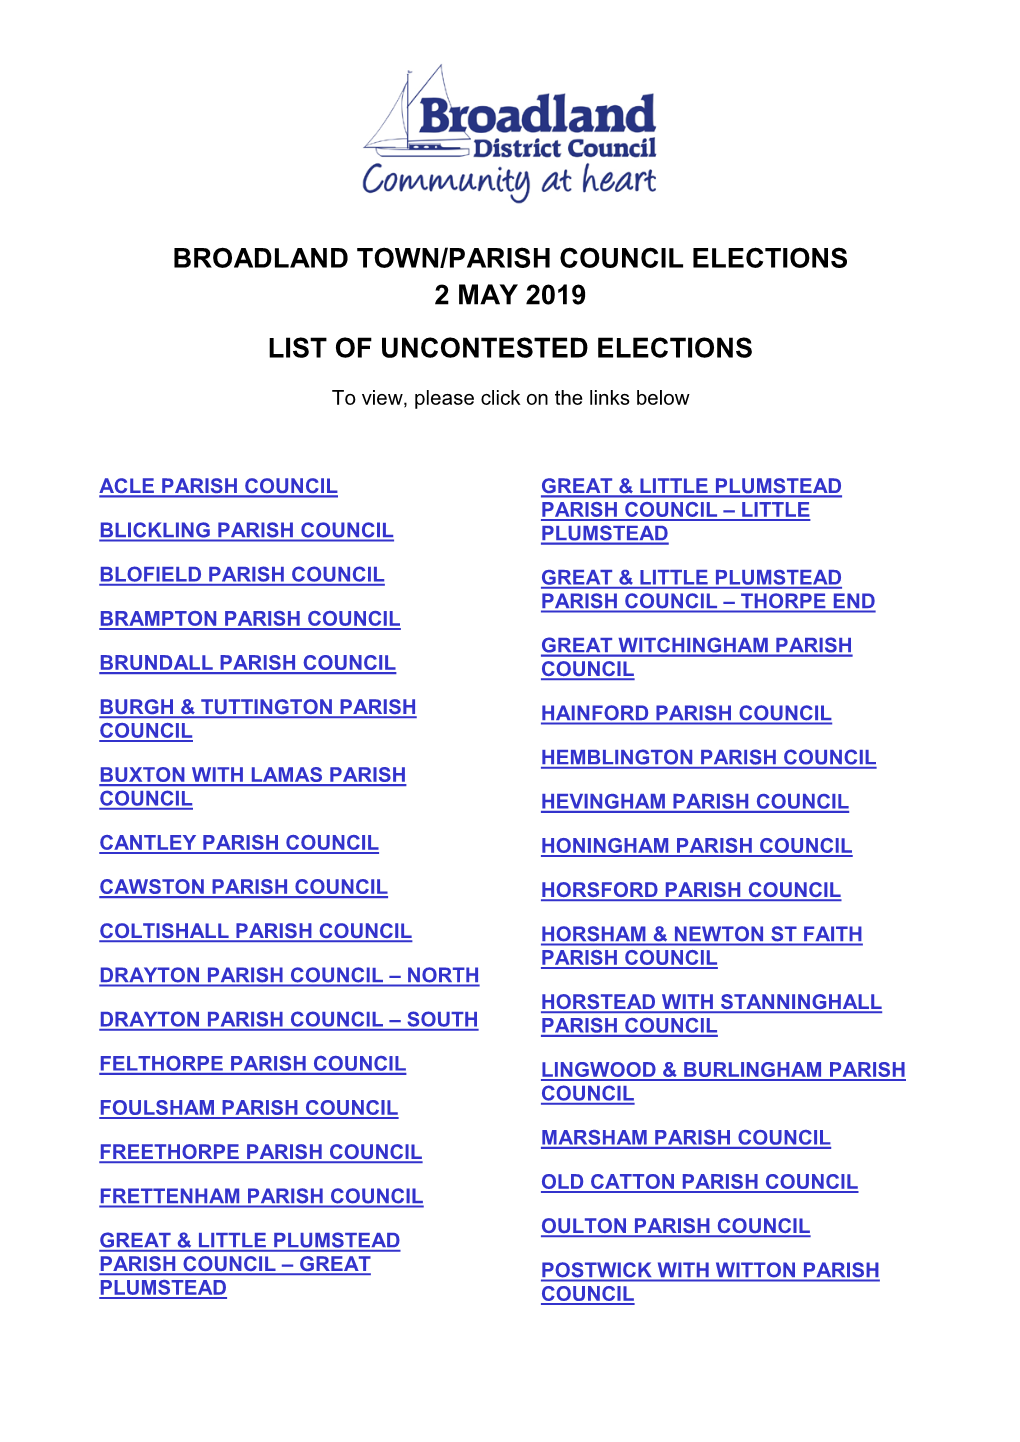 Results of Uncontested Town/Parish Elections on 2 May 2019